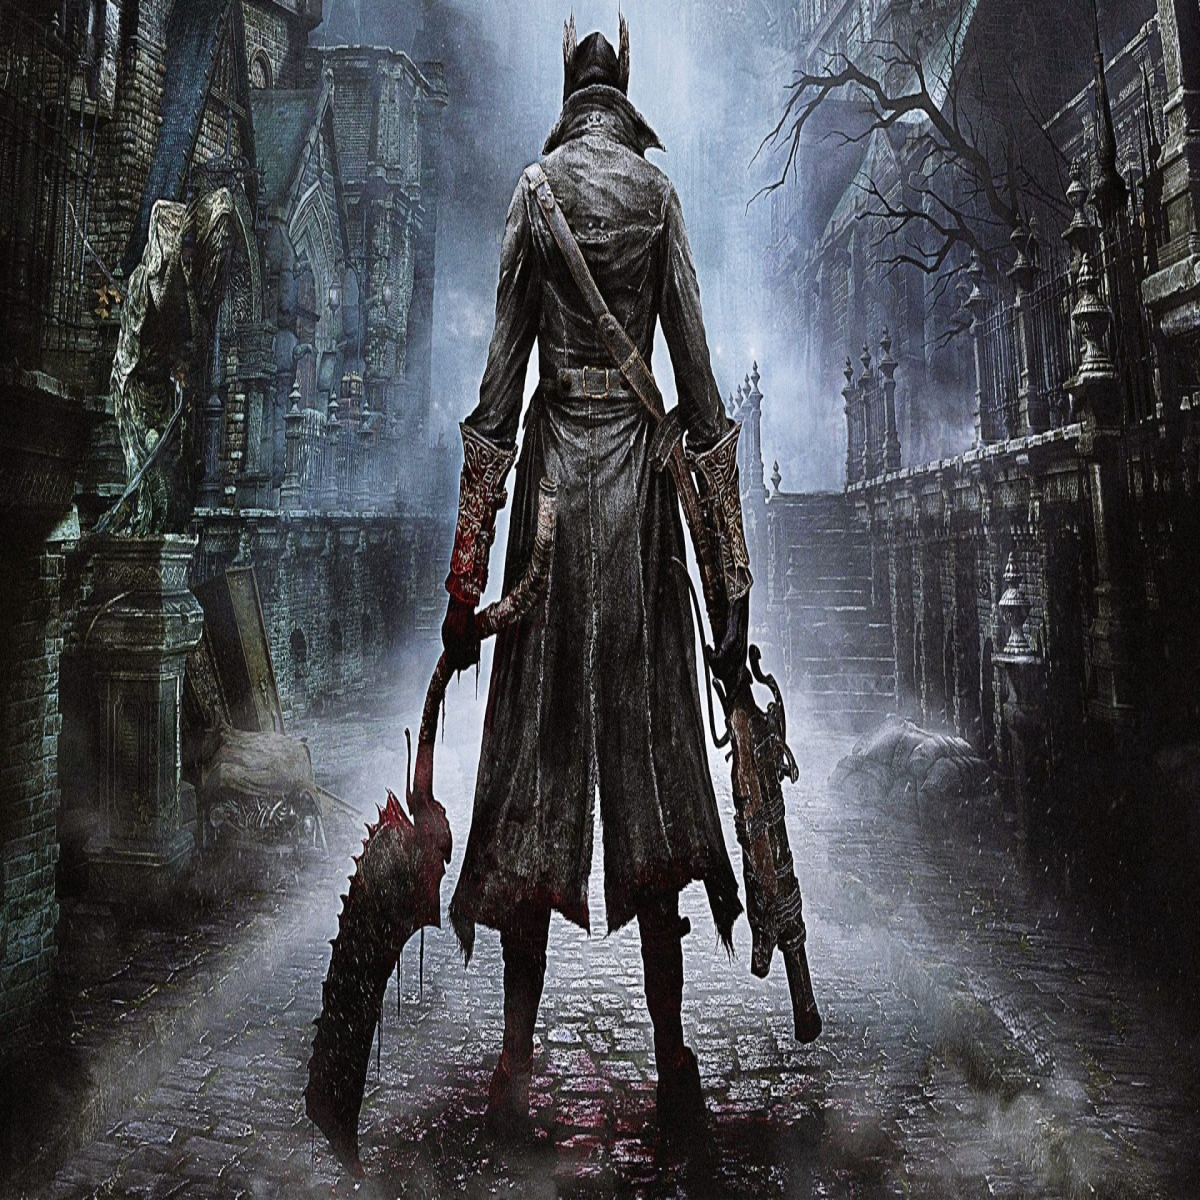 Could Nixxes bring Bloodborne to the PC?